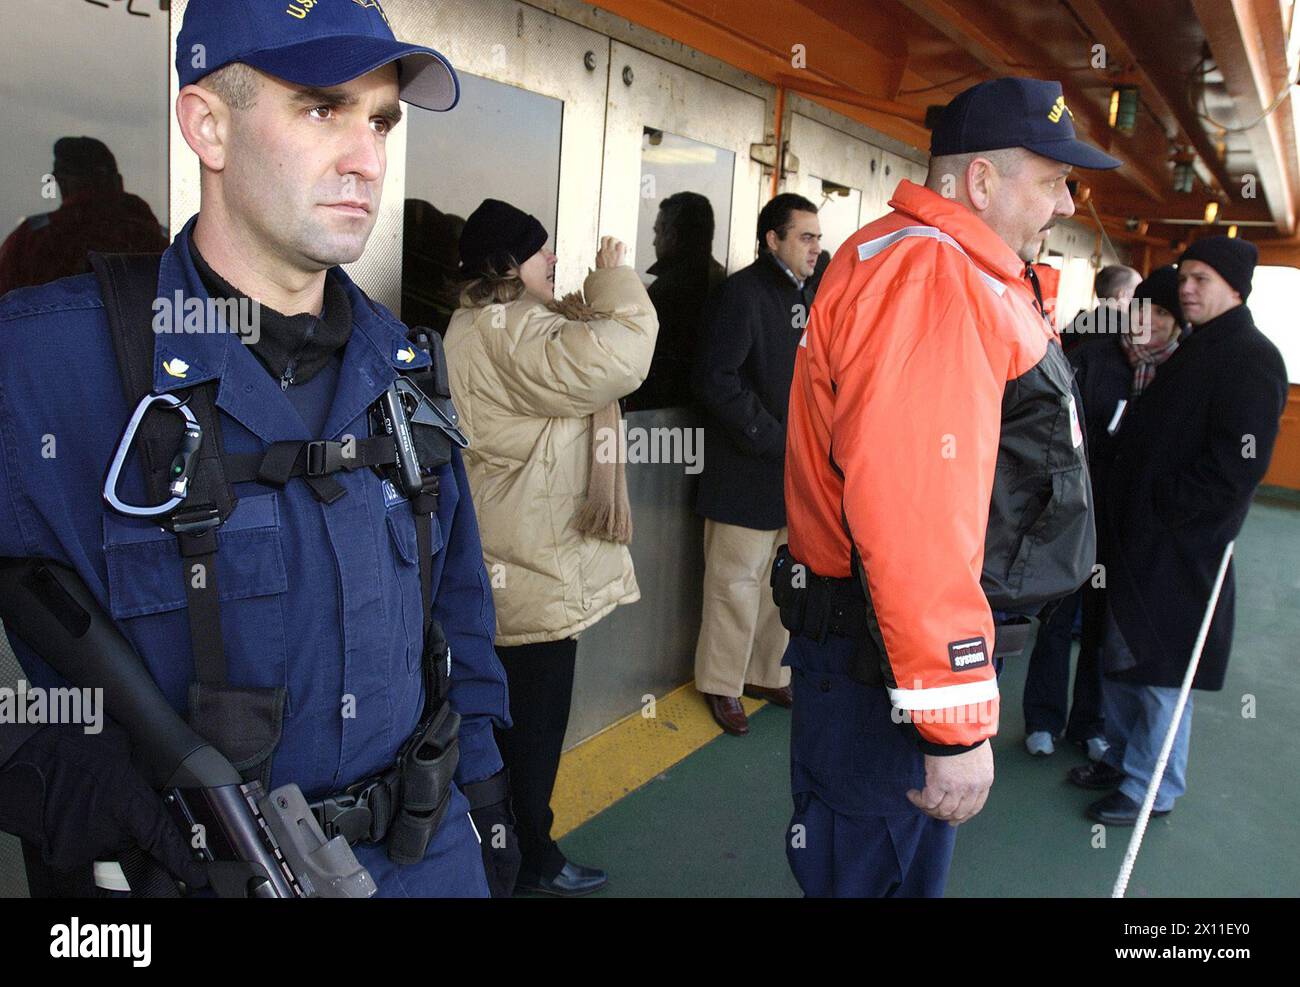 NEW YORK, New York (Jan. 8, 2004)--Petty Officer 3rd Class Chad Walder of Franklin Lakes, N.J., patrols a Staten Island Ferry with members of a commercial vessel boarding team January 8, 2004 in New York harbor. Stock Photo